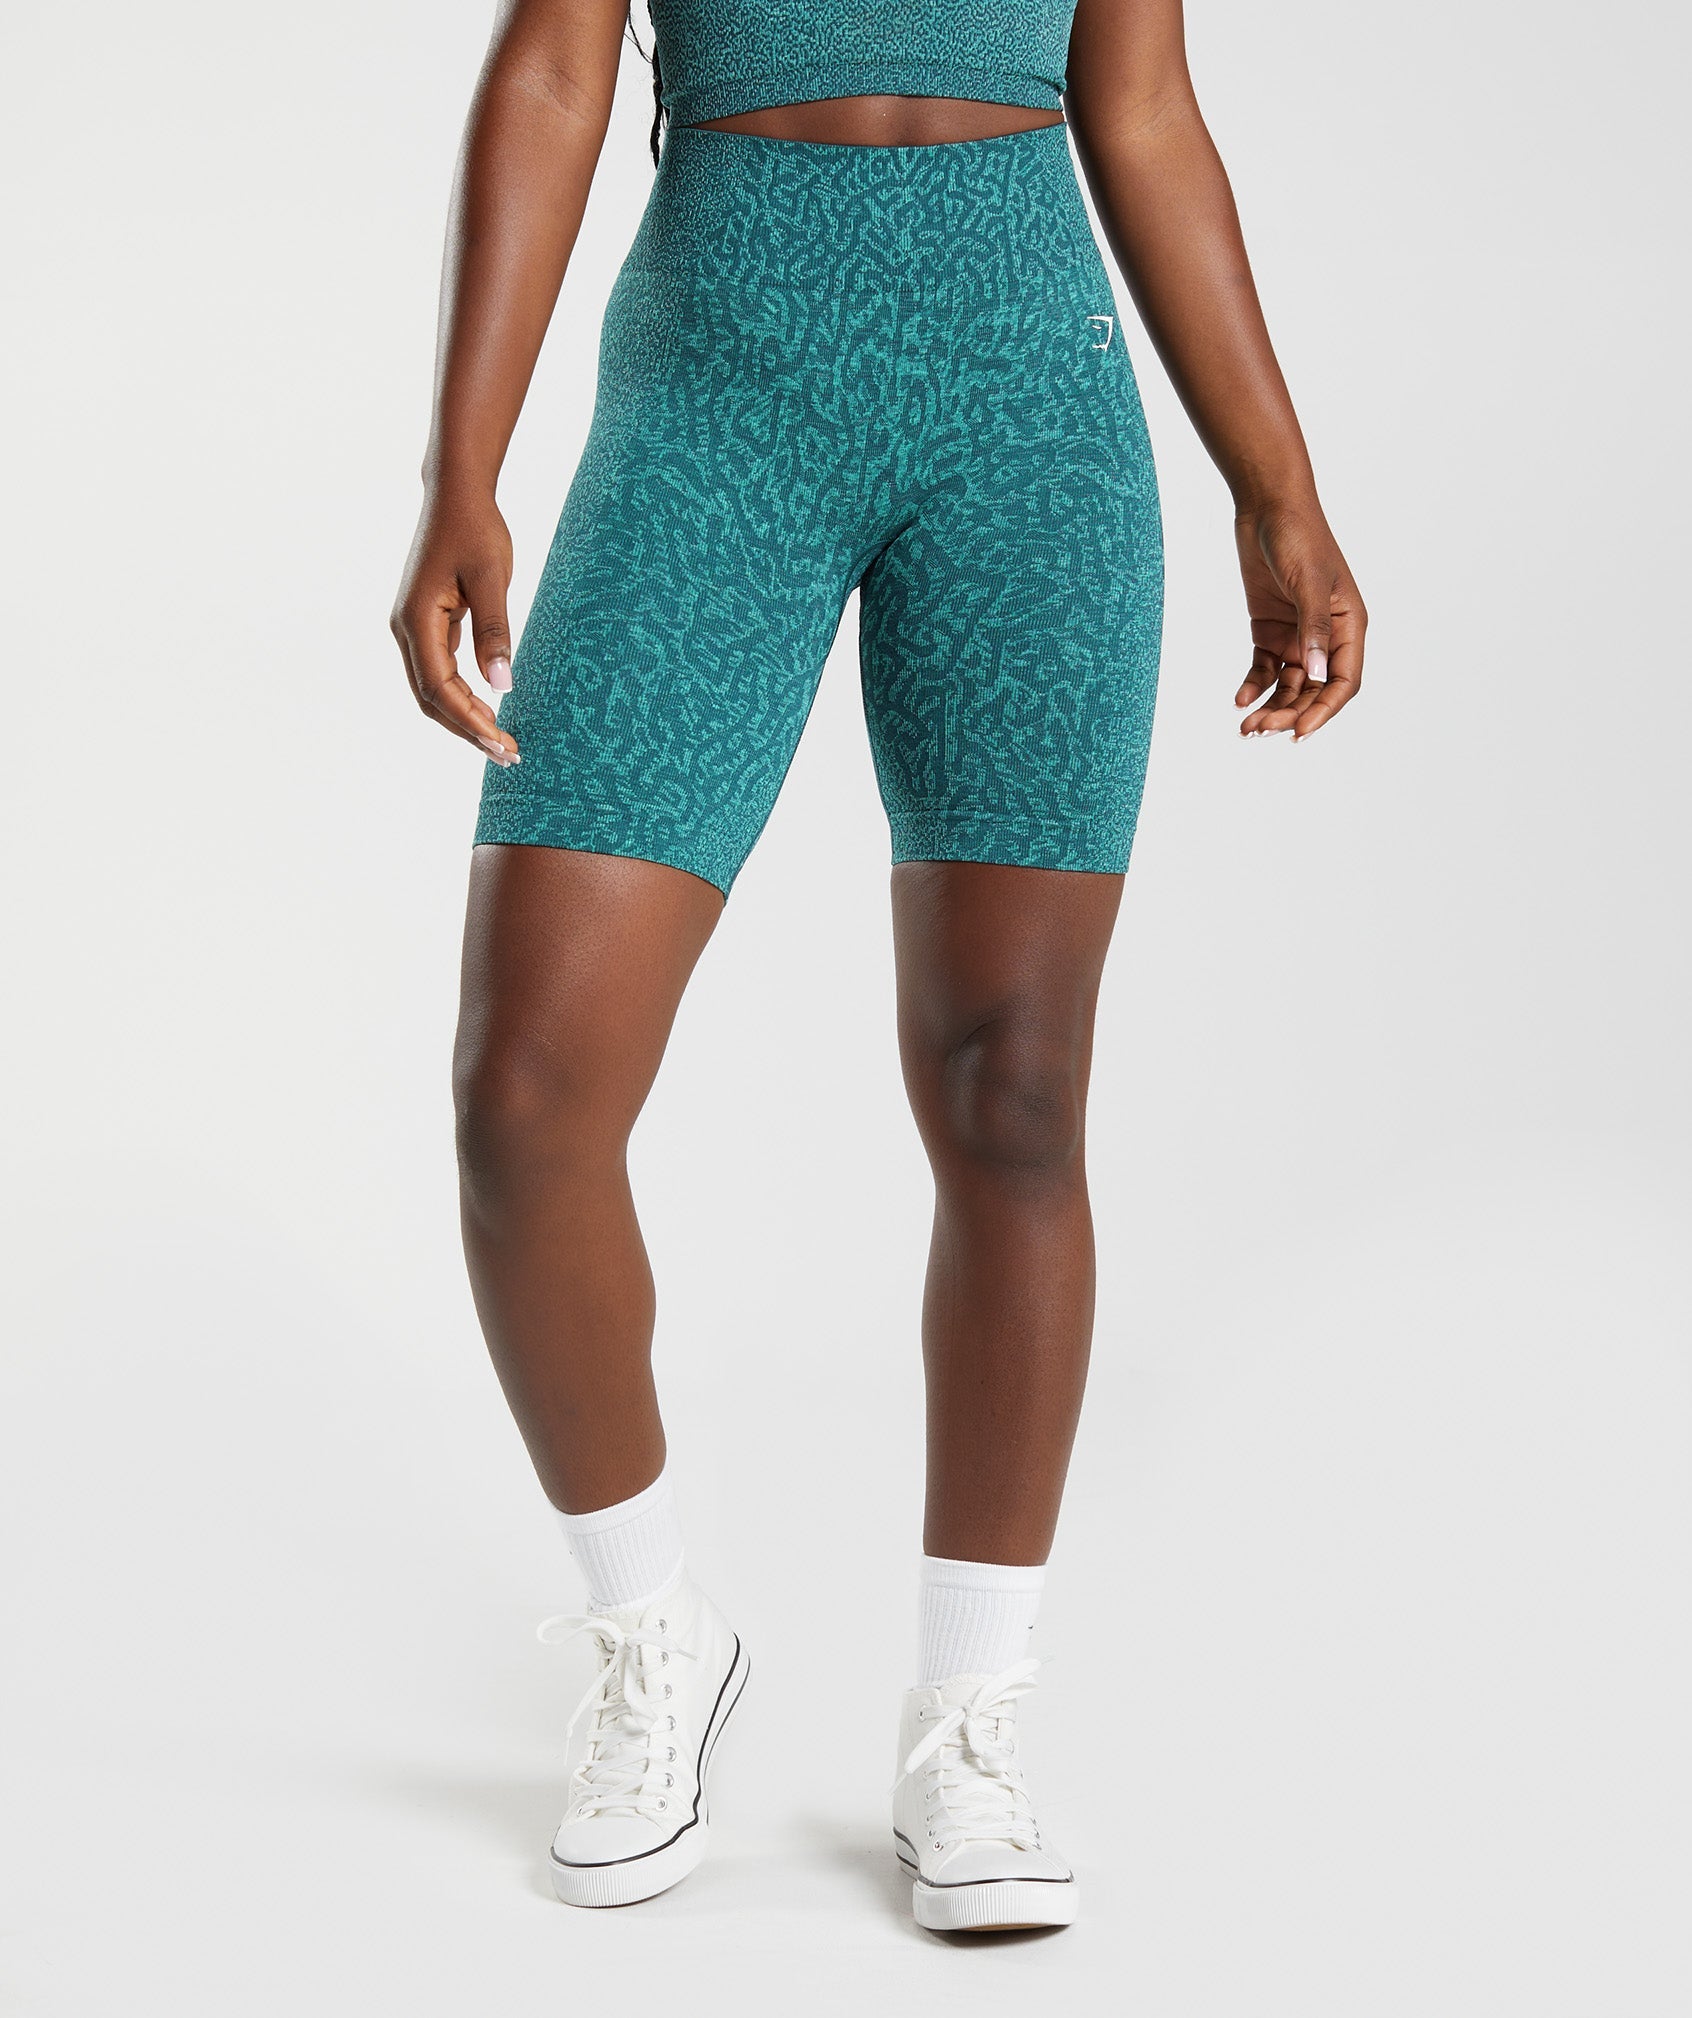 Adapt Animal Seamless Cycling Shorts in Reef | Winter Teal